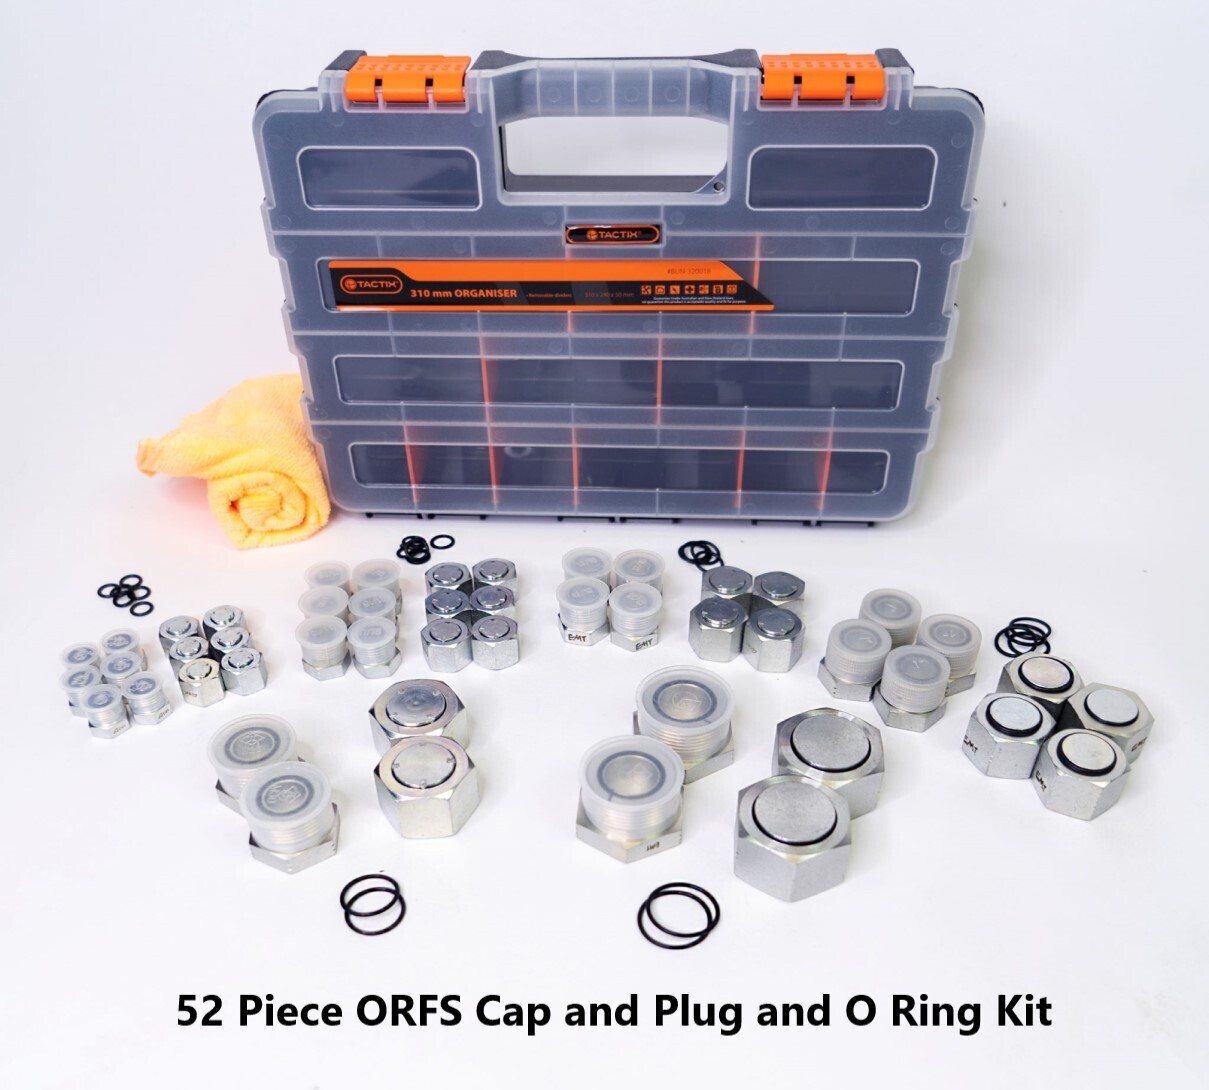 52 Piece ORFS Plug & Cap Kit packed in a Strong Case with O' Rings and Microfibre cloth